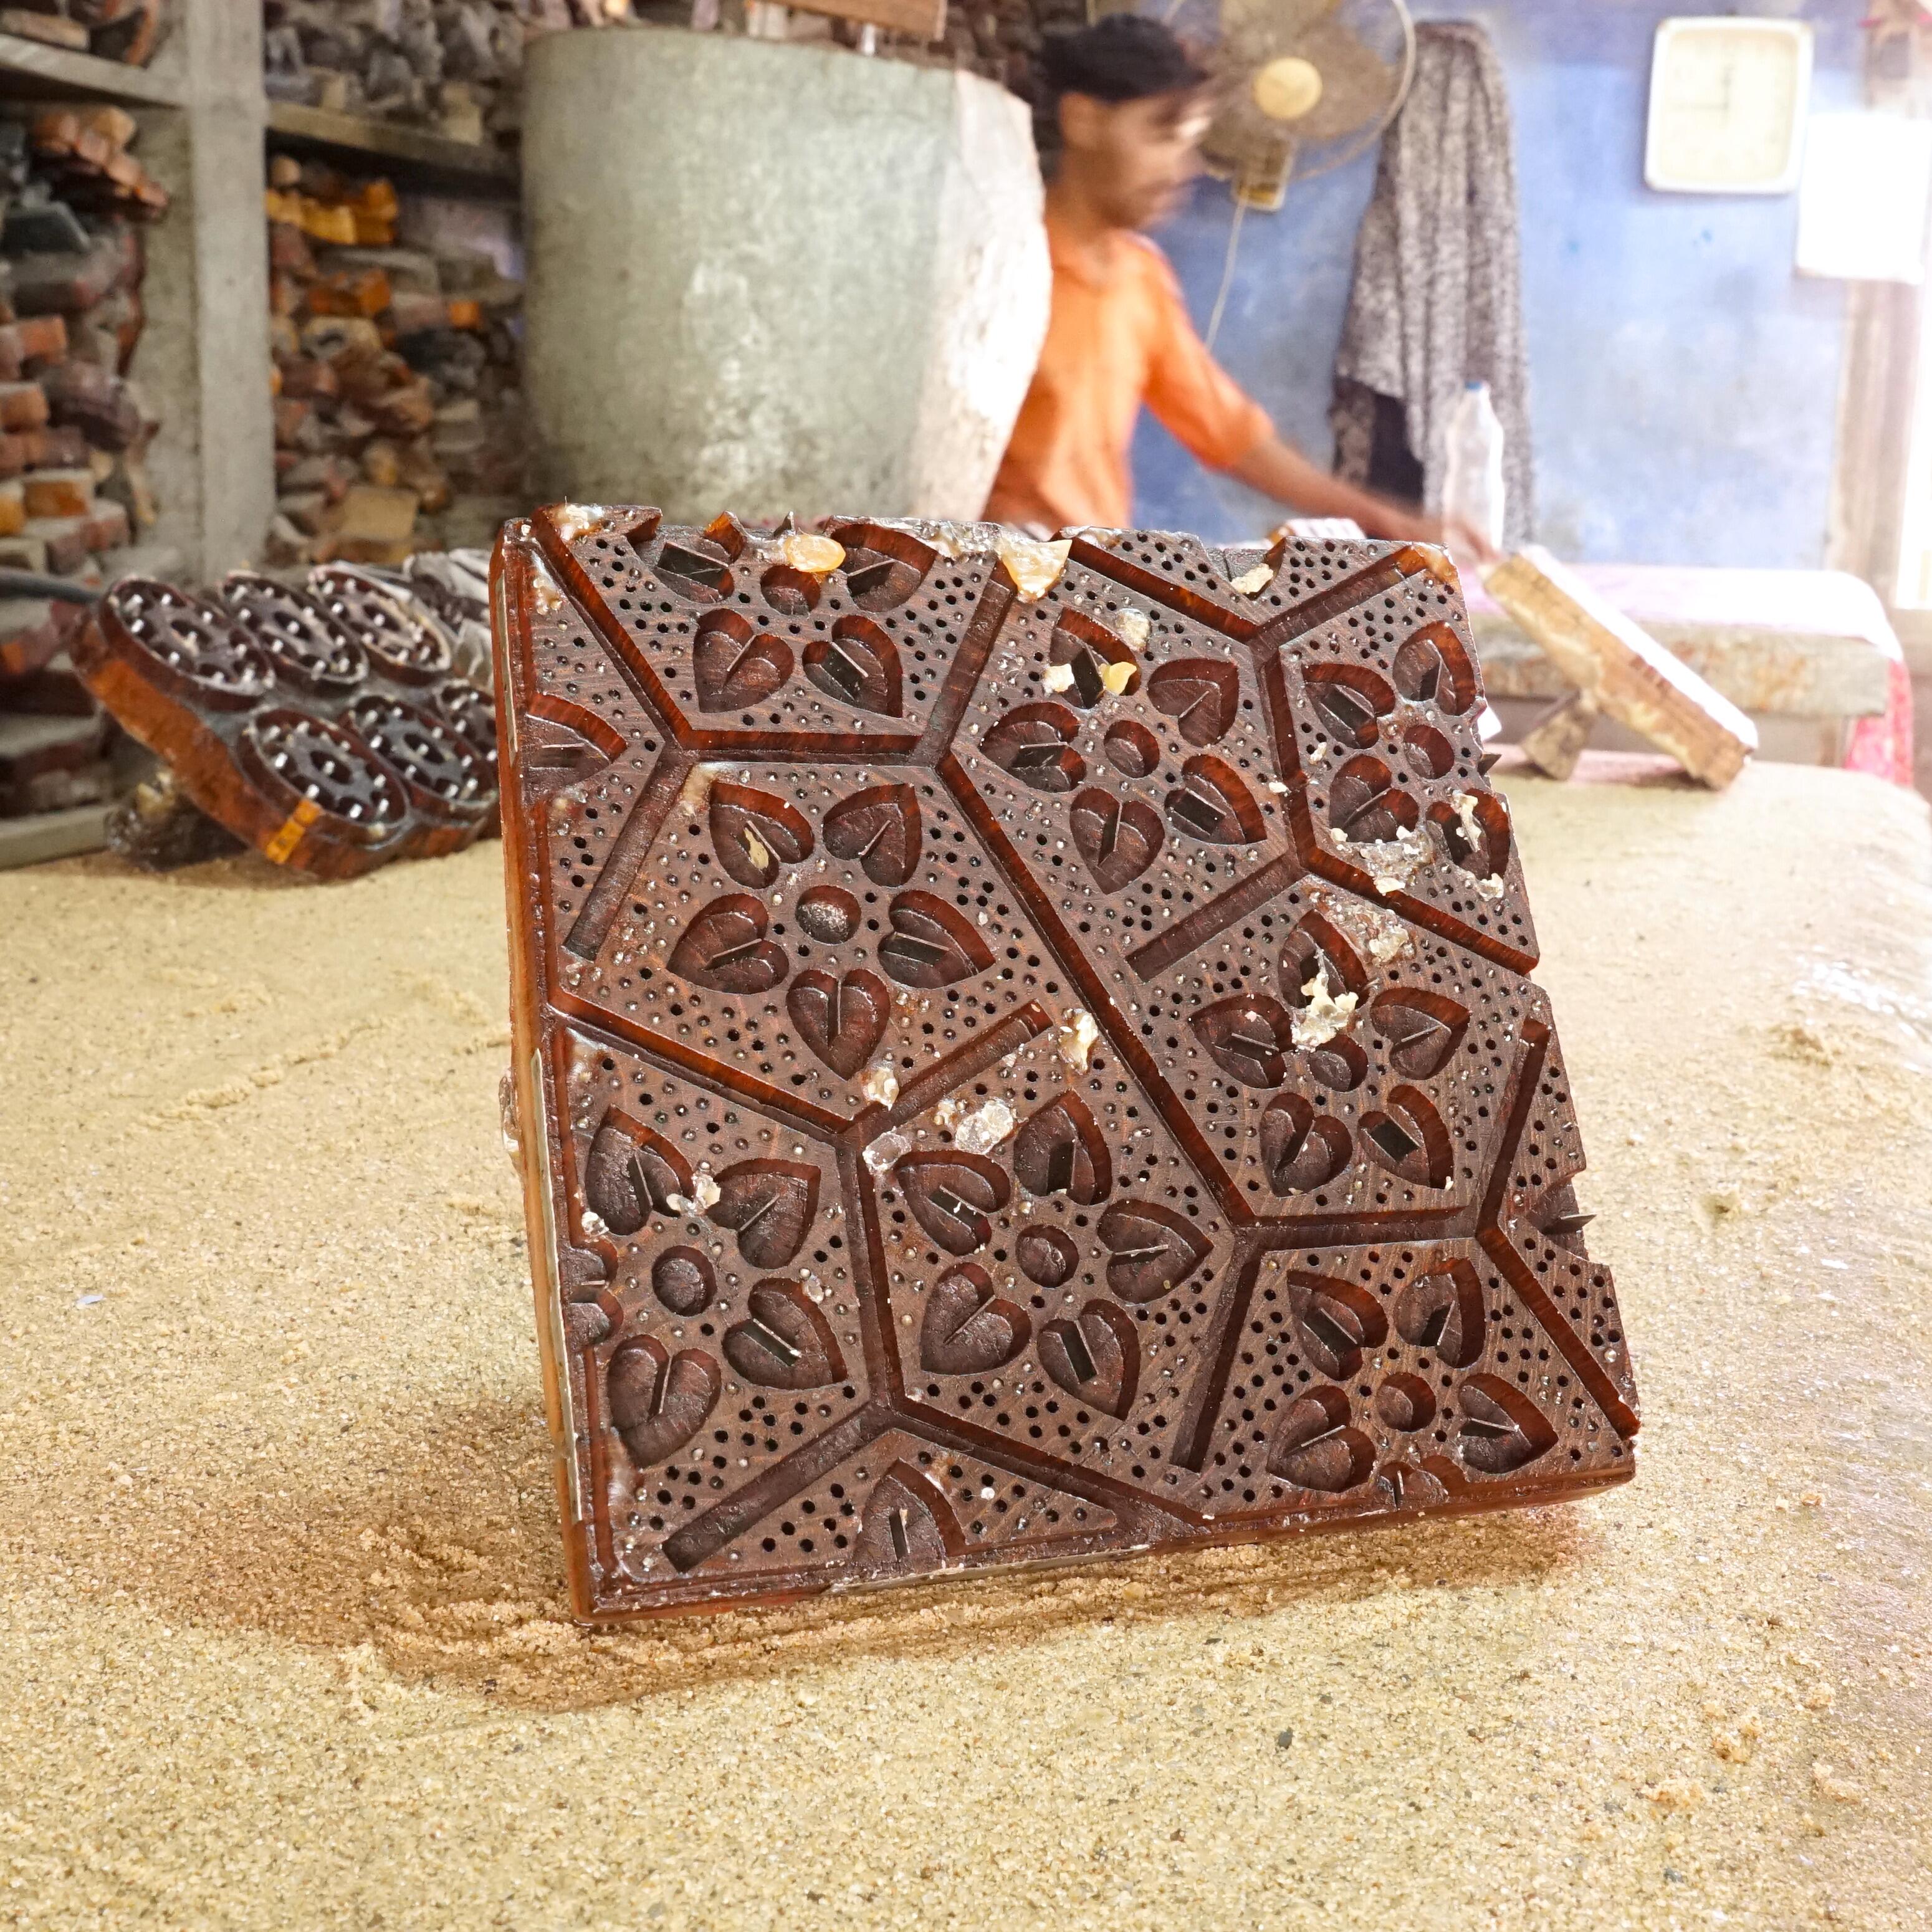 SHA53 - Hand-Carved Block for Wax Resist Printing